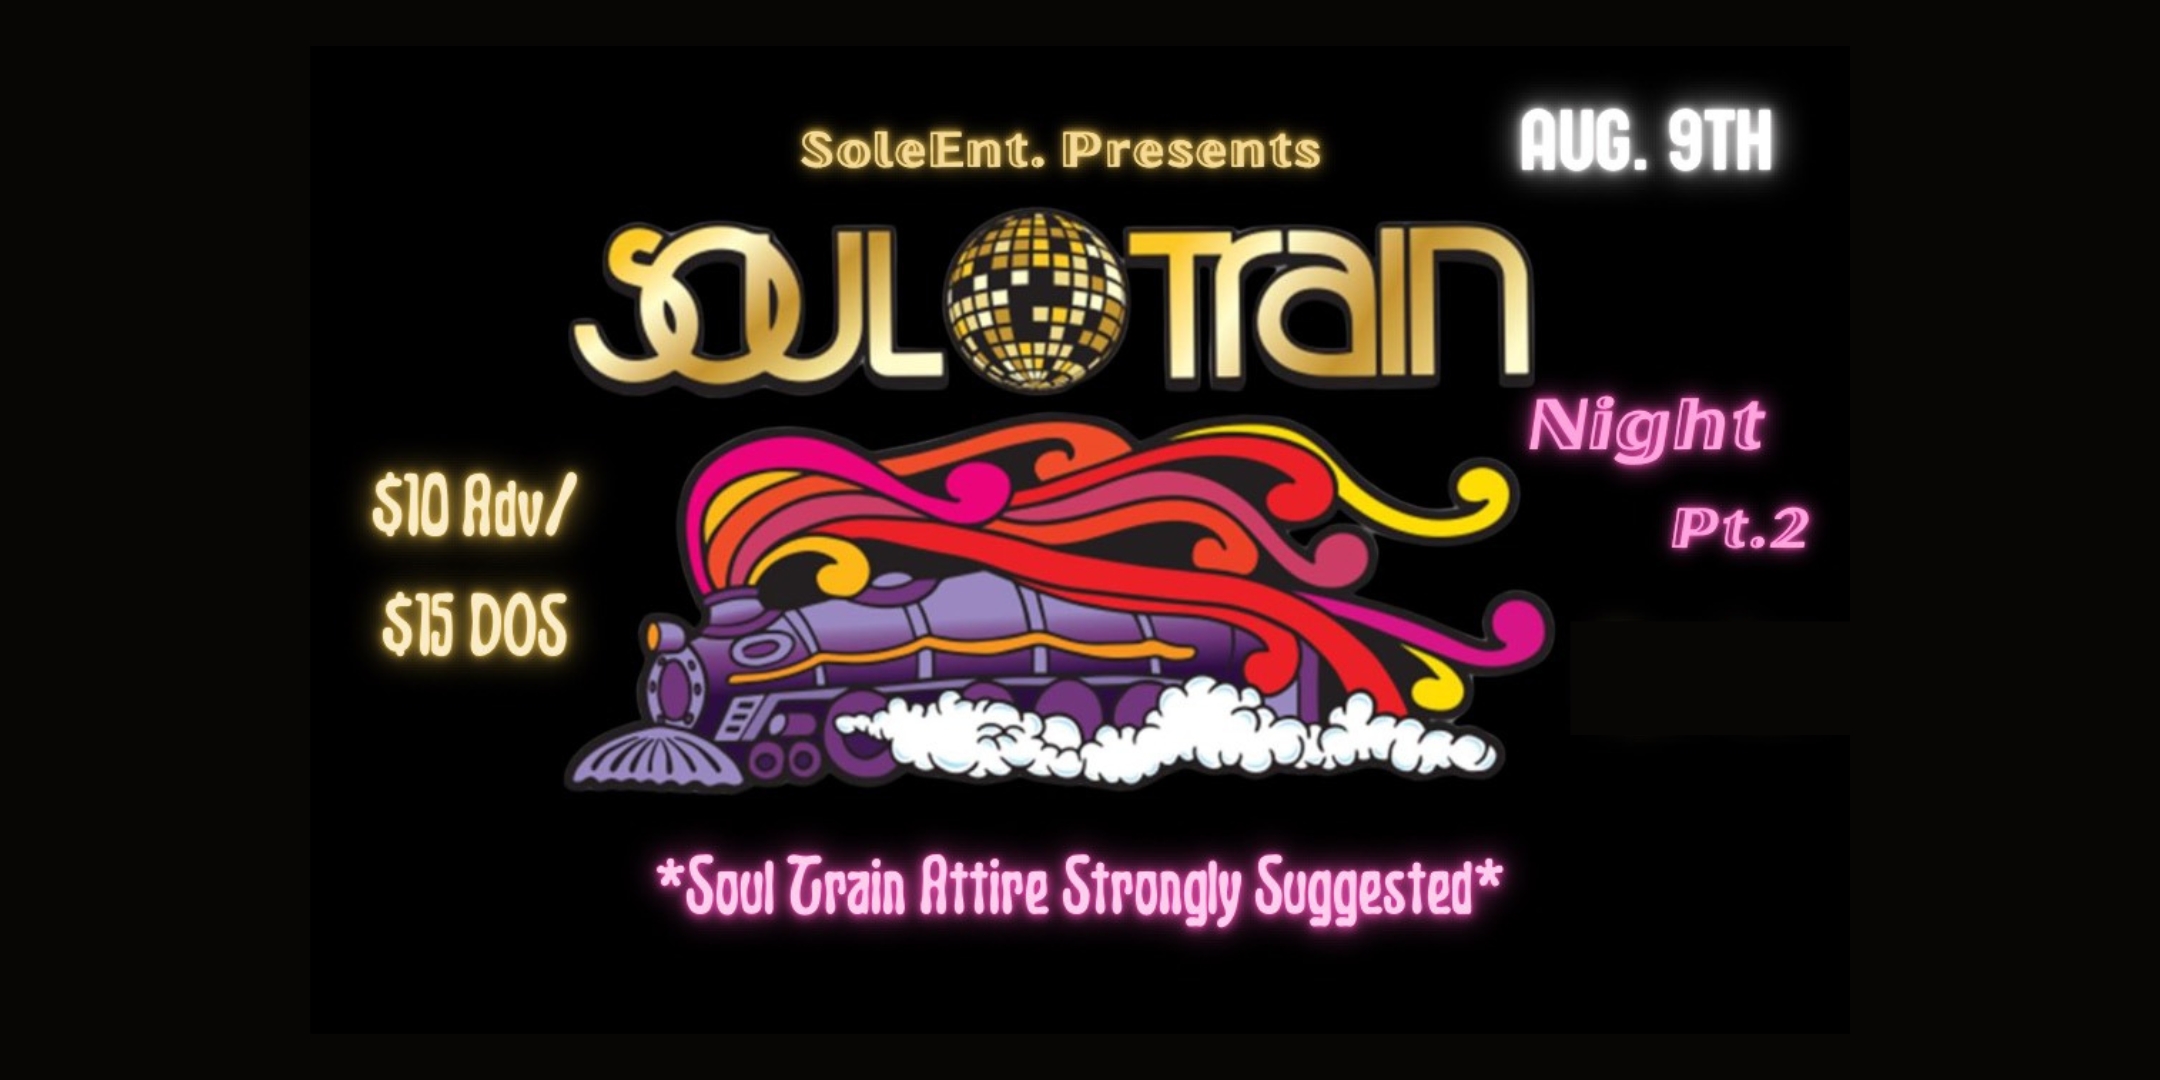 SoleEnt. Presents Soul Train Night *Soul Train Attire Strongly Encouraged* Traditional & Modern Funk, House, Disco & Soul w/ Live Performances Friday, August 9 James Ballentine "Uptown" VFW Post 246 Doors 9:30pm :: Music 9:30pm :: 21+ General Admission :: $10 Advance / $15 Day of Show NO REFUNDS Tickets On-Sale Now